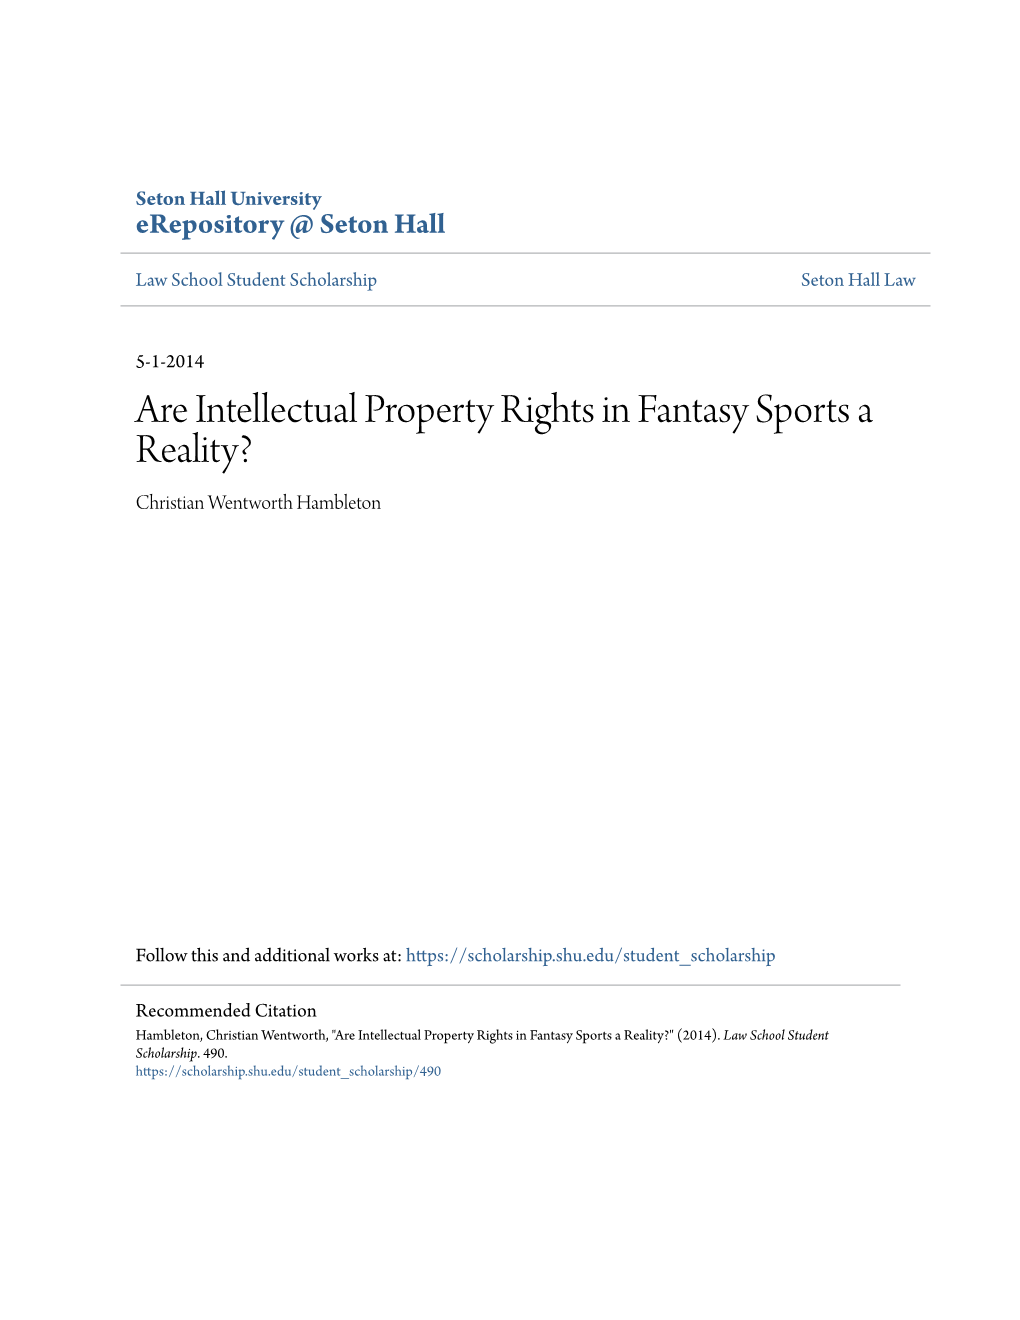 Are Intellectual Property Rights in Fantasy Sports a Reality? Christian Wentworth Hambleton